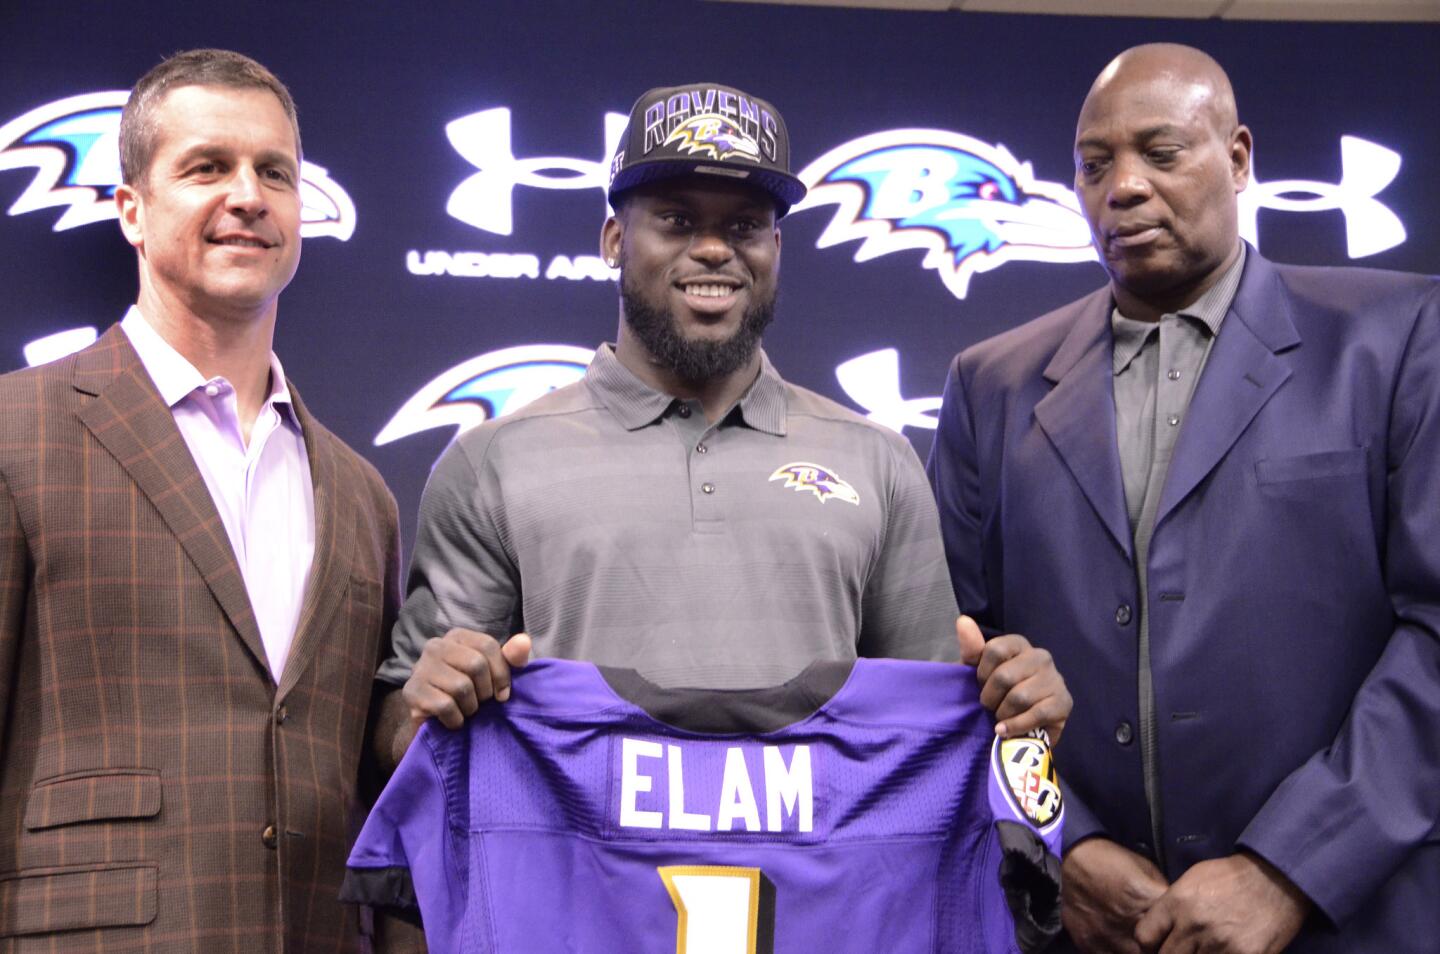 Ravens coach John Harbaugh and general manager Ozzie Newsome pose for pictures with first-round draft pick Matt Elam.